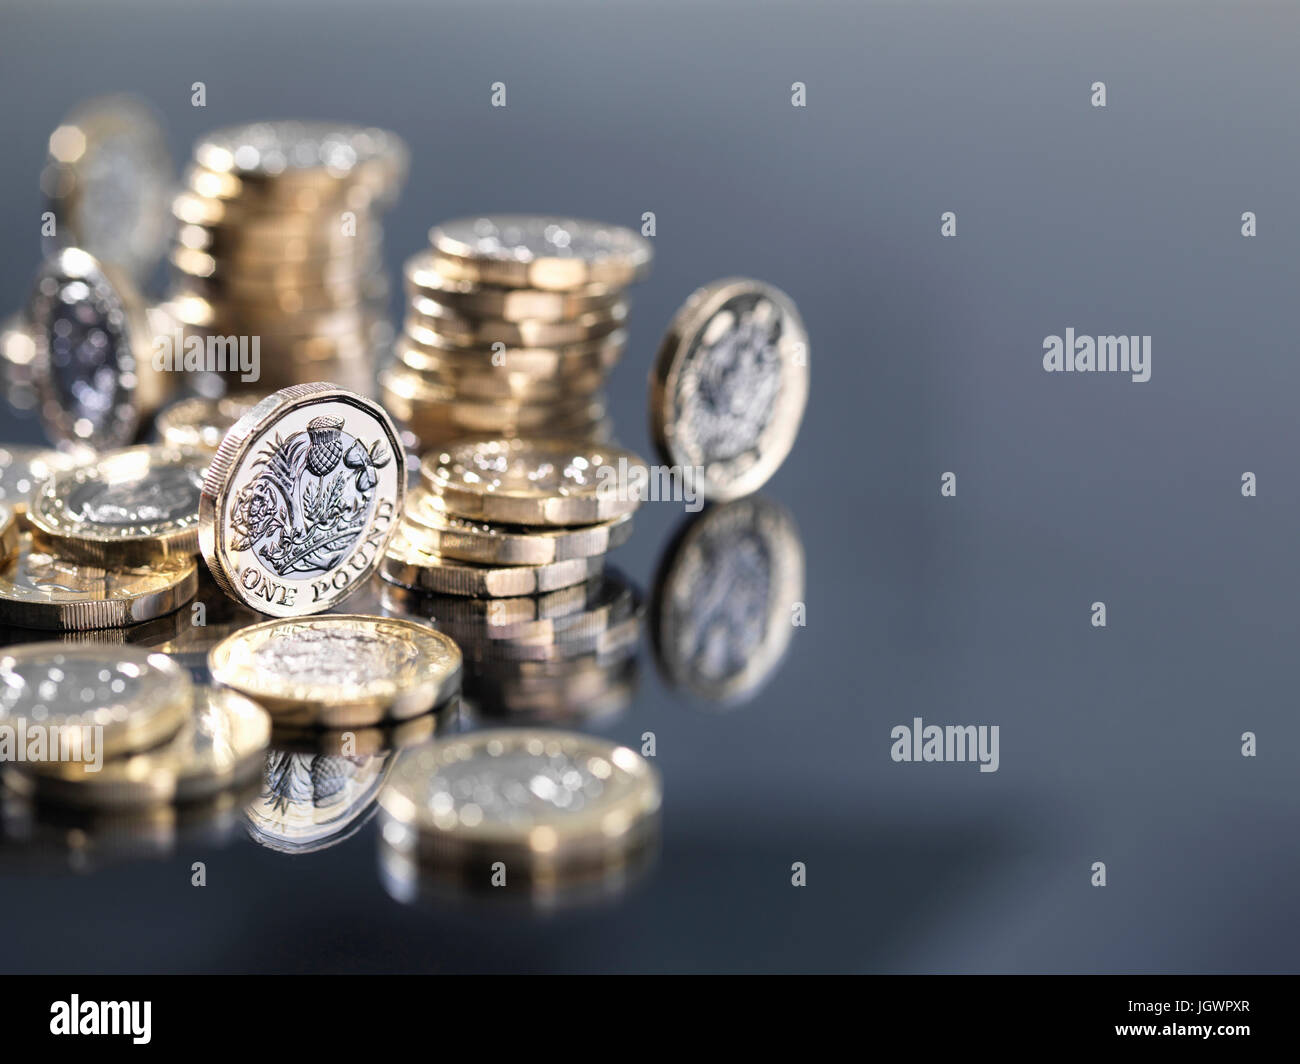 Pile of new British one pound coins, close-up Stock Photo